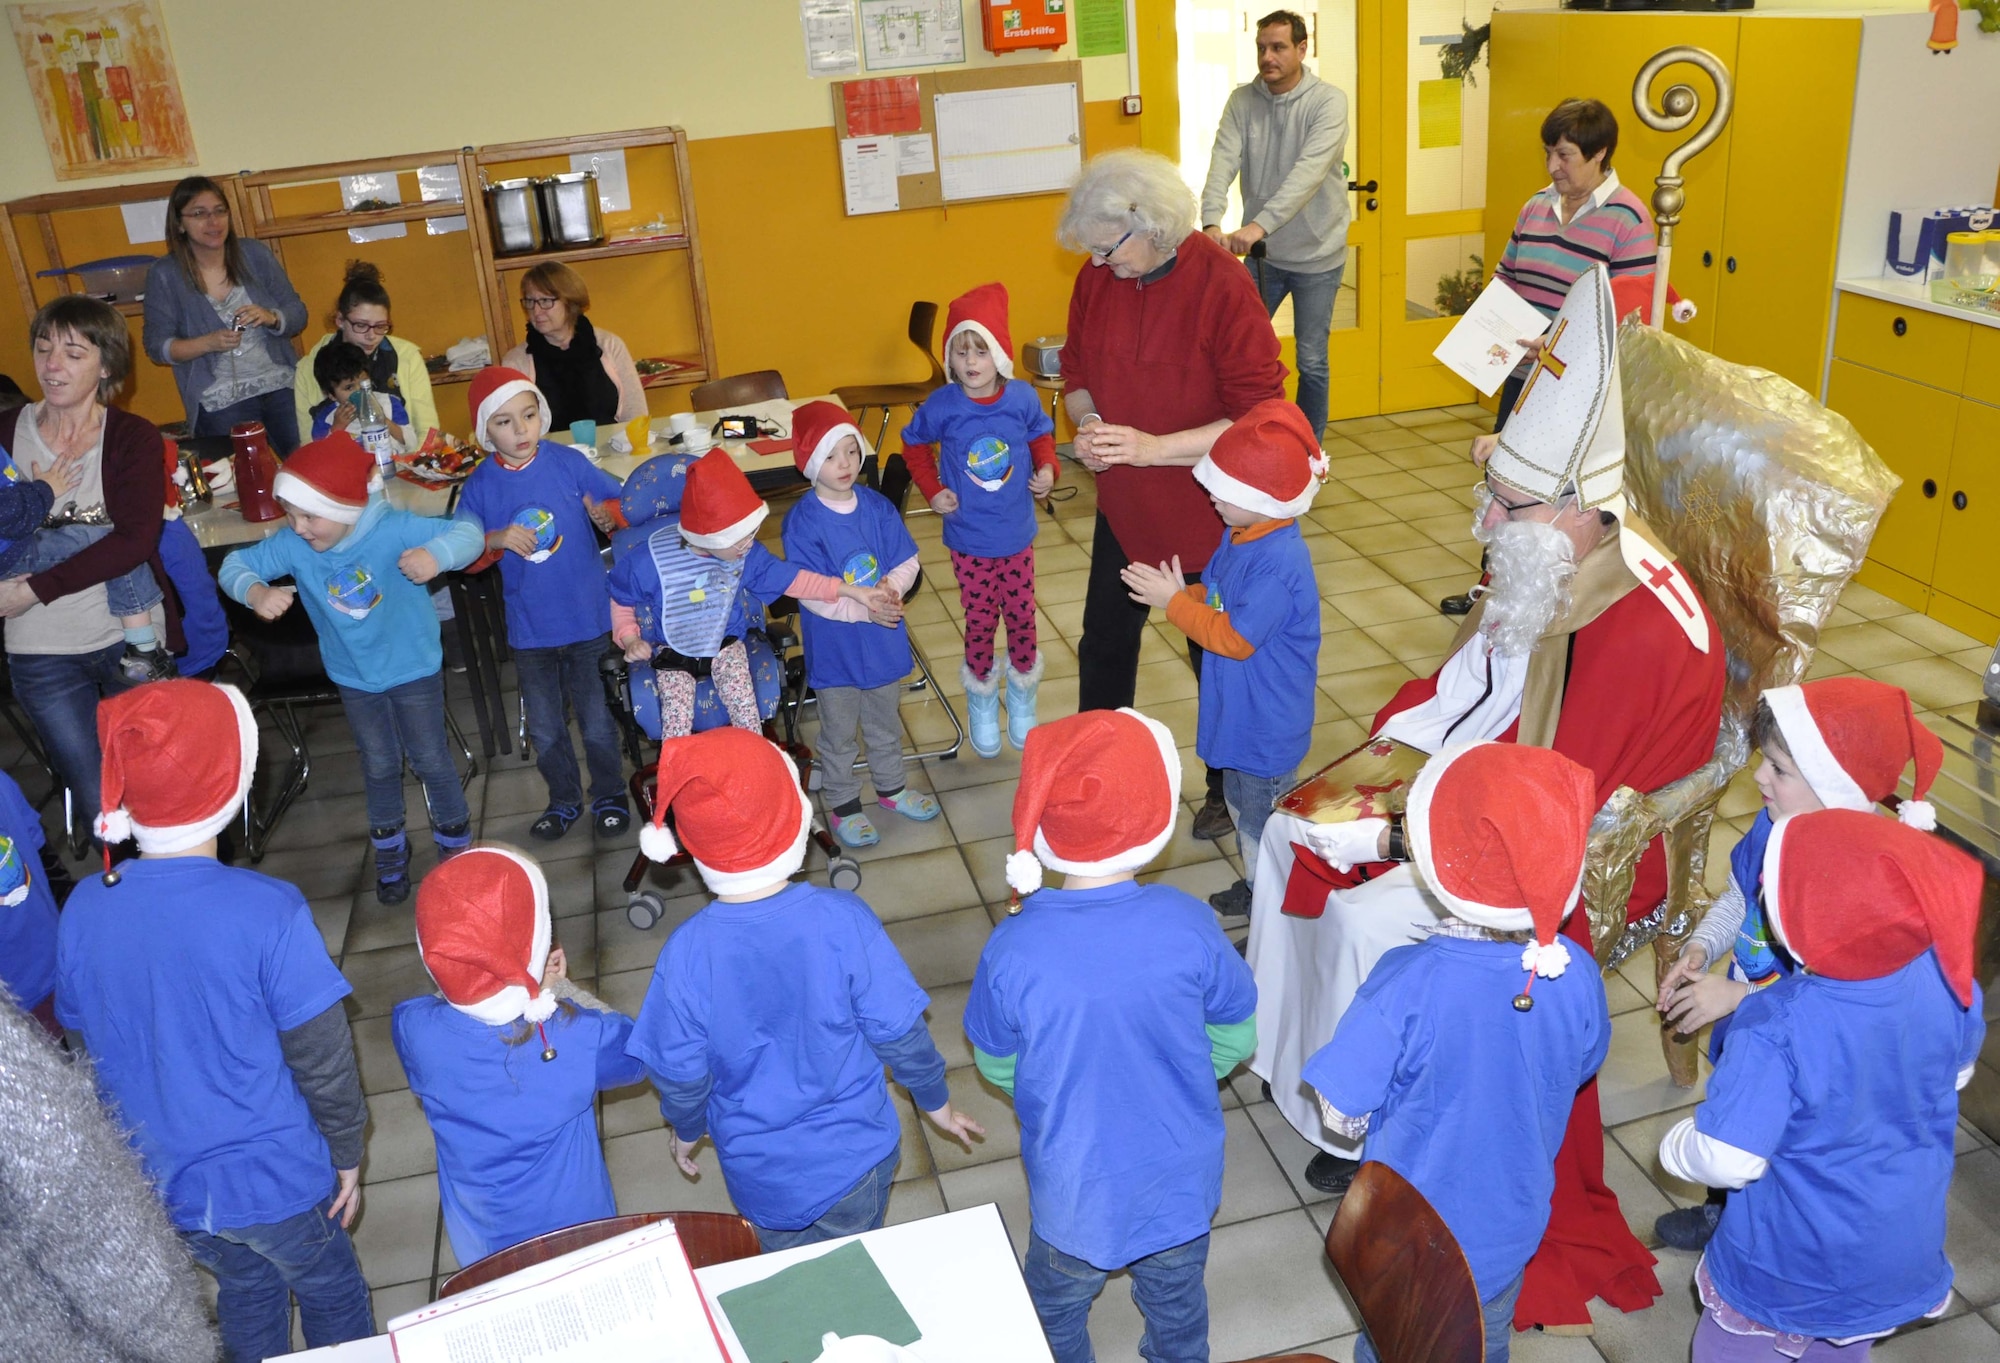 A group of Kindergarten children, belonging to the Bitburg Saint Martin school performed a dance during the school’s annual Saint Nicholas celebration, Dec. 5 in Bitburg. The event included a visit by Saint Nicholas, dances and singing performances by the children, as well as a gift presentation by the 52nd Fighter Wing. The celebration was attended by Saint Martin school officials, parents, 52nd Fighter Wing leadership spouses, as well as Airmen and civilians from the wing, who provided gifts to students and kindergarten children.  In the summer, Spangdahlem Sabers invited the Saint Martin school to Special Children’s Day at Spangdahlem AB, where they played games and spent a fun-filled time together. (U.S. Air Force photo by Iris Reiff)